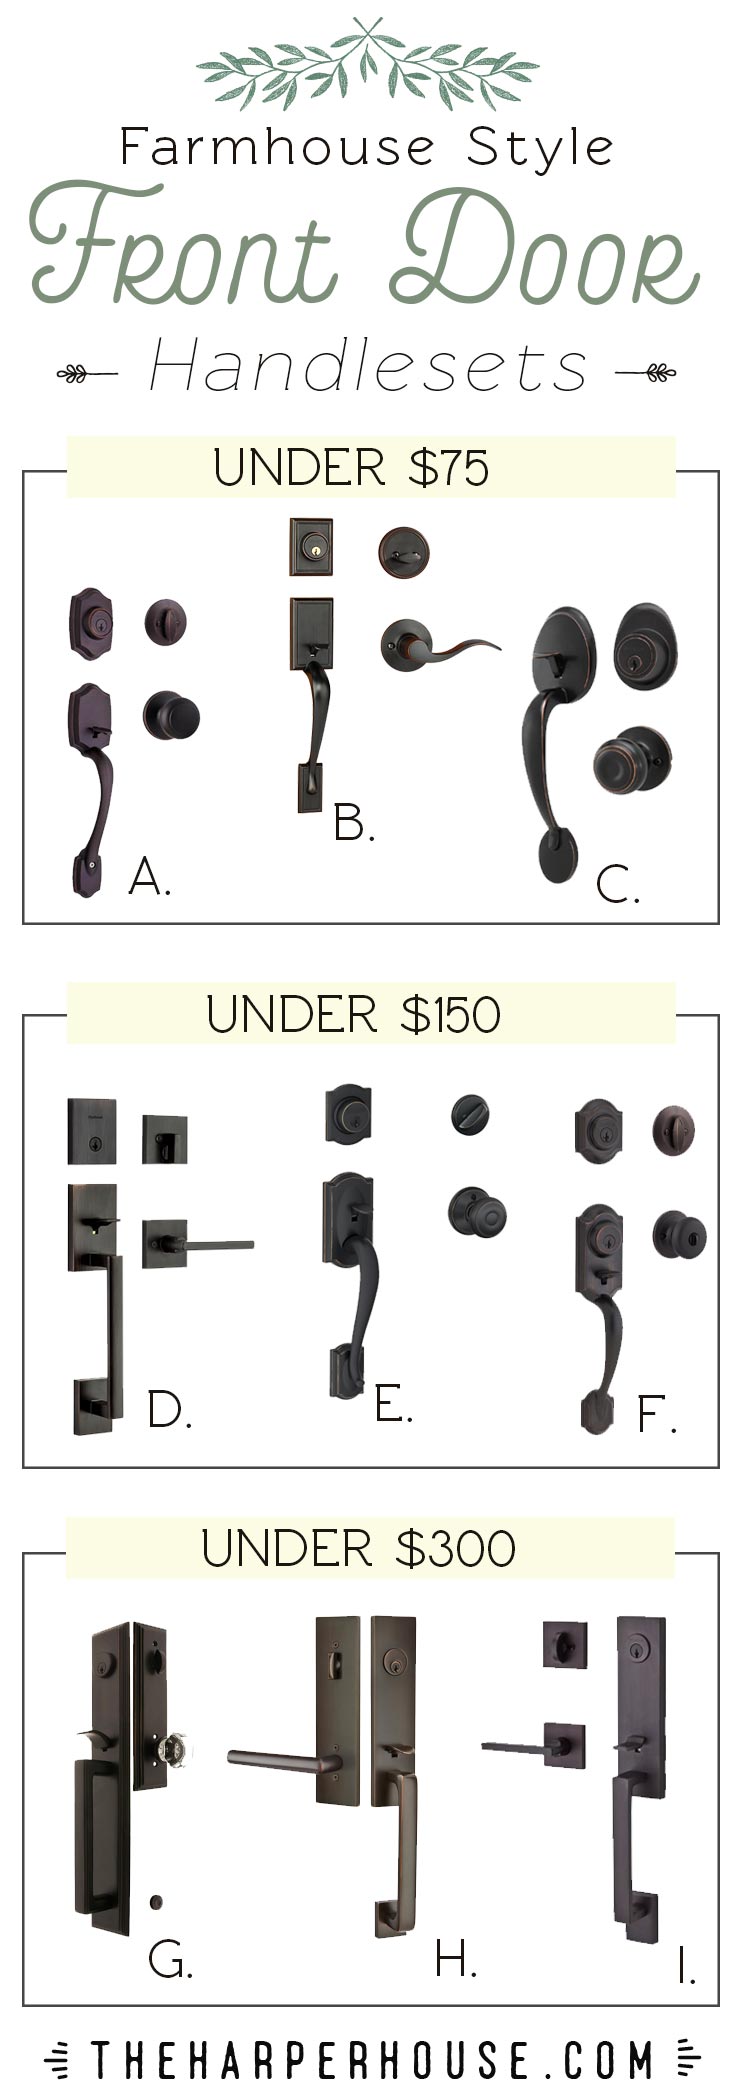 full source list of affordable front door handles for a modern farmhouse look. Most available on Amazon!